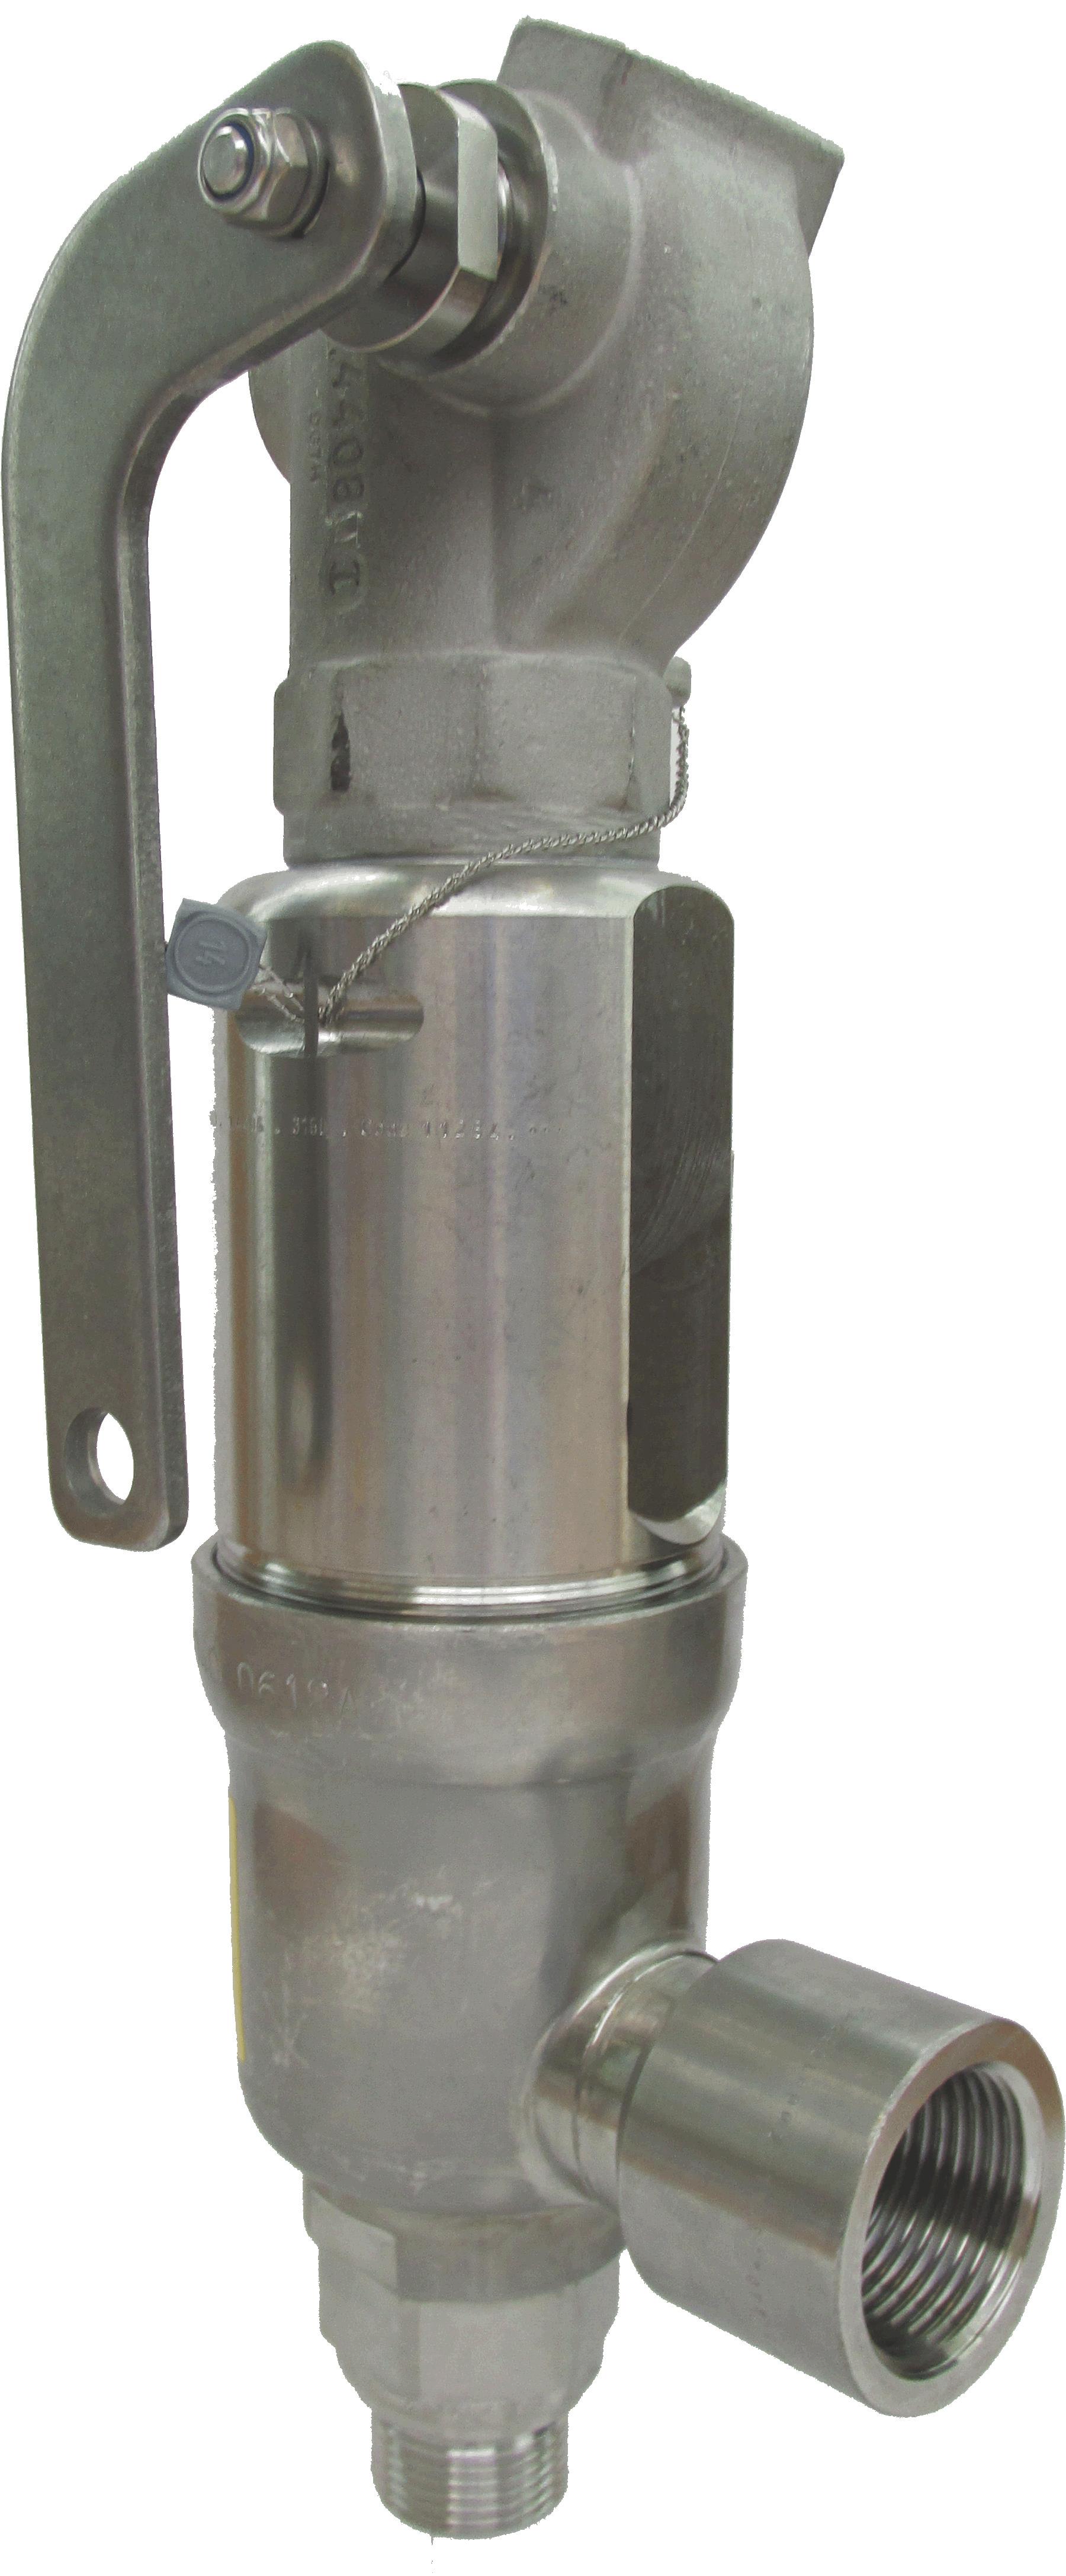 2042-2945 6.0 BAR 1/4" BSPM PRESSURE SAFETY VALVE Lorch/Protect-air Safety Val 